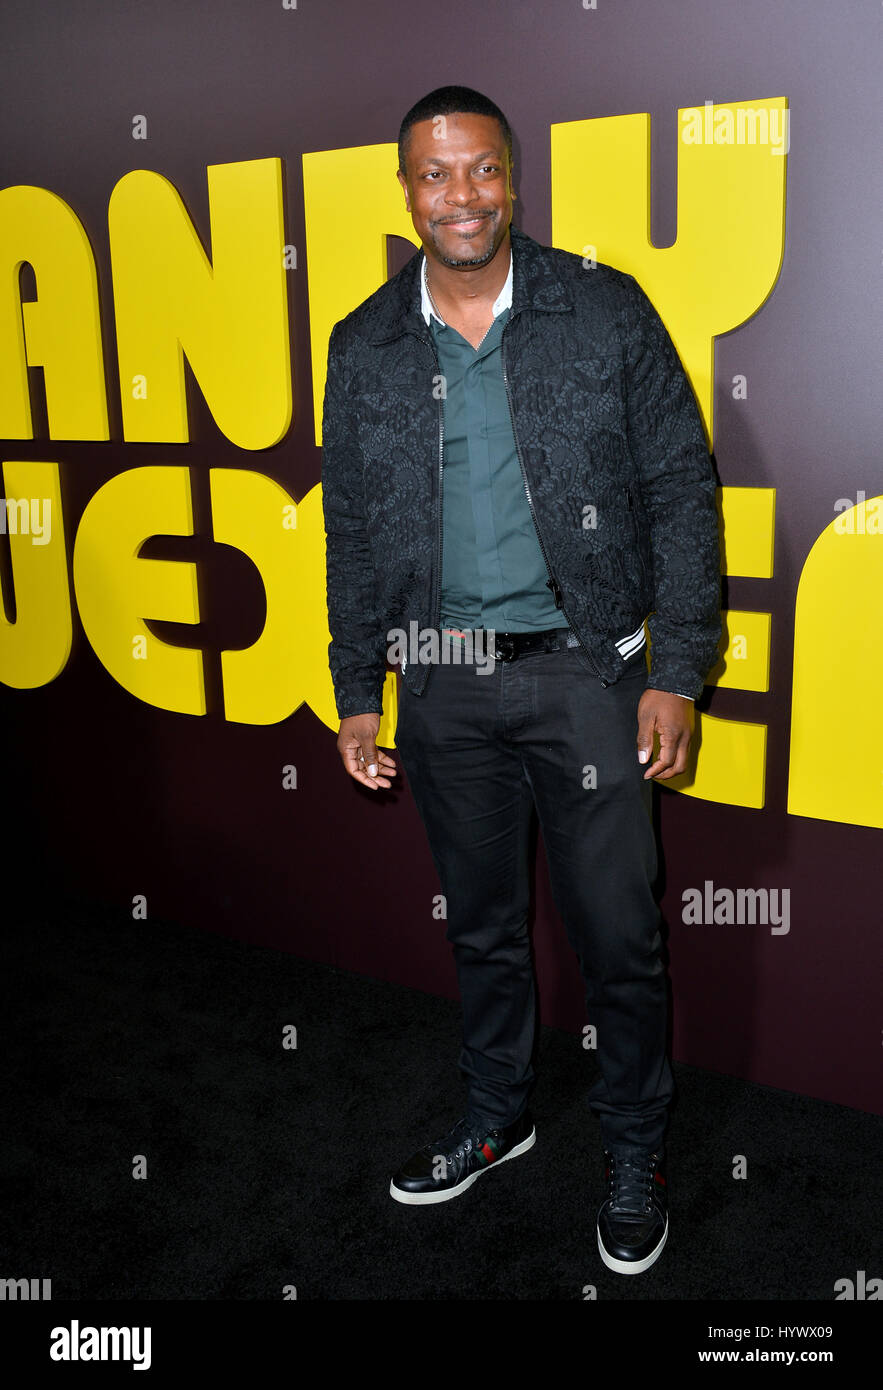 Los Angeles, USA. 06th Apr, 2017. Actor Chris Tucker at the premiere for 'Sandy Wexler' at The Cinerama Dome, Hollywood. Picture Credit: Sarah Stewart/Alamy Live News Stock Photo